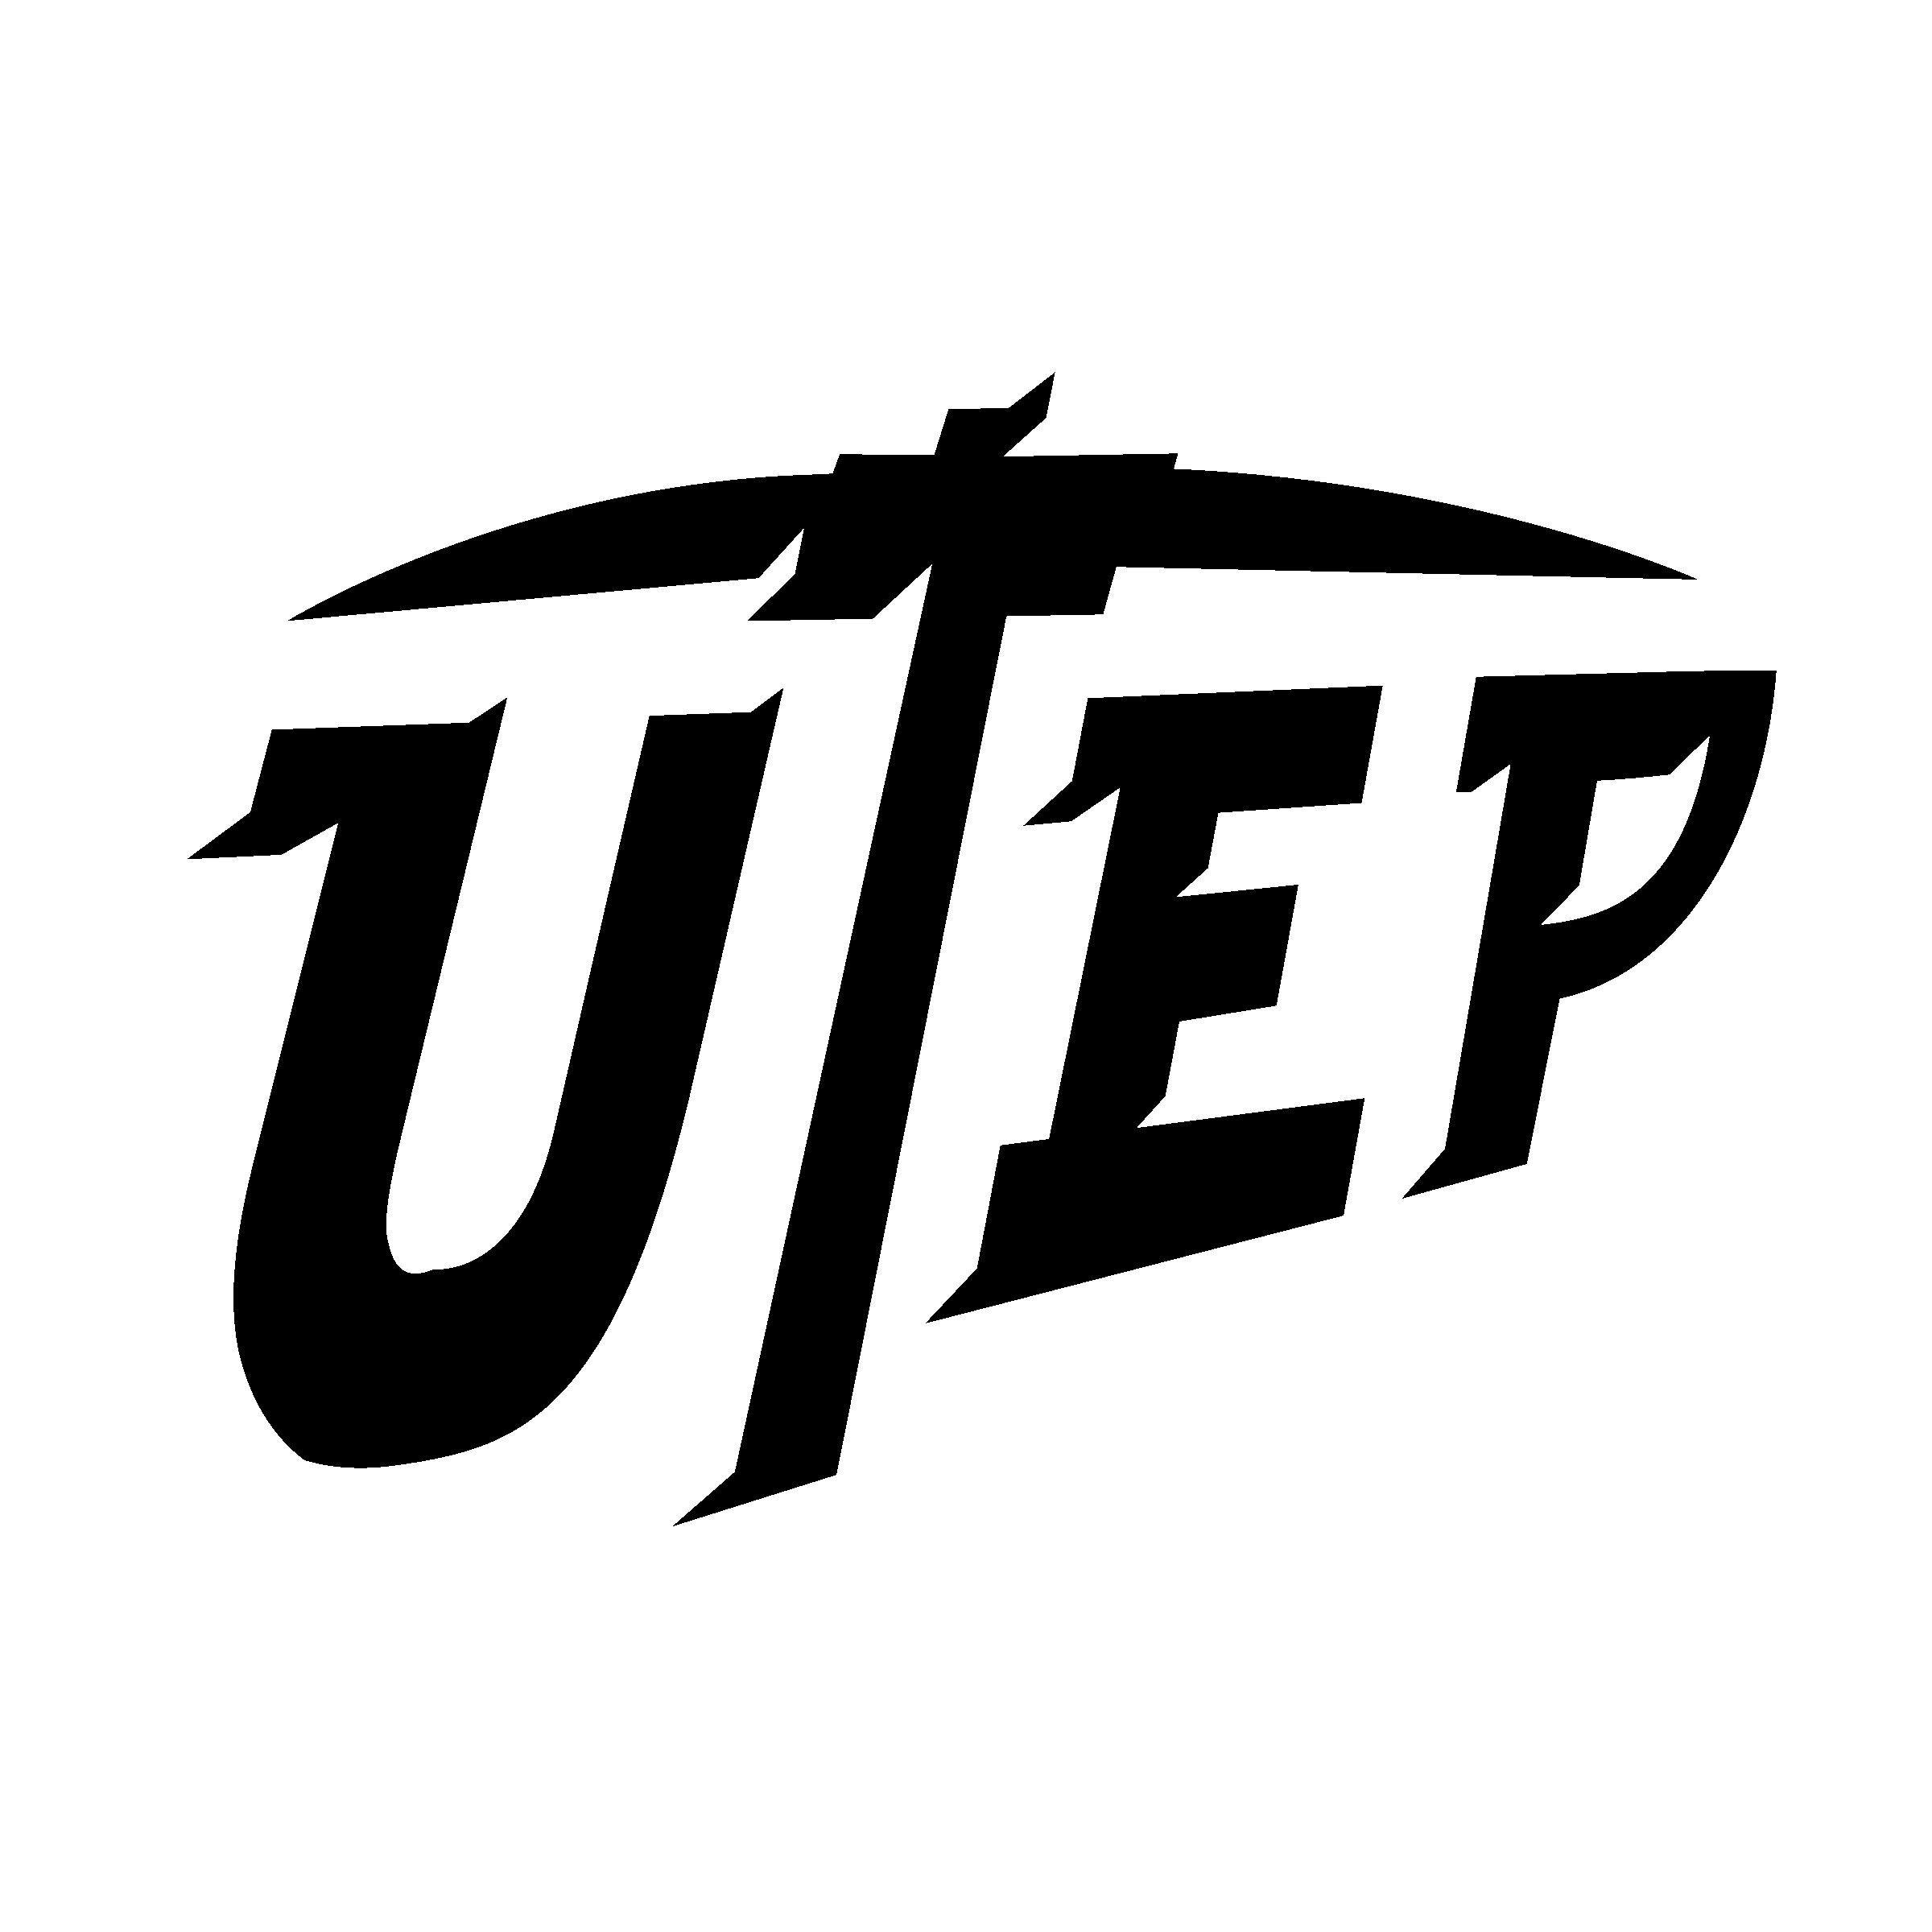 Mining clipart utep. Miners logo png transparent